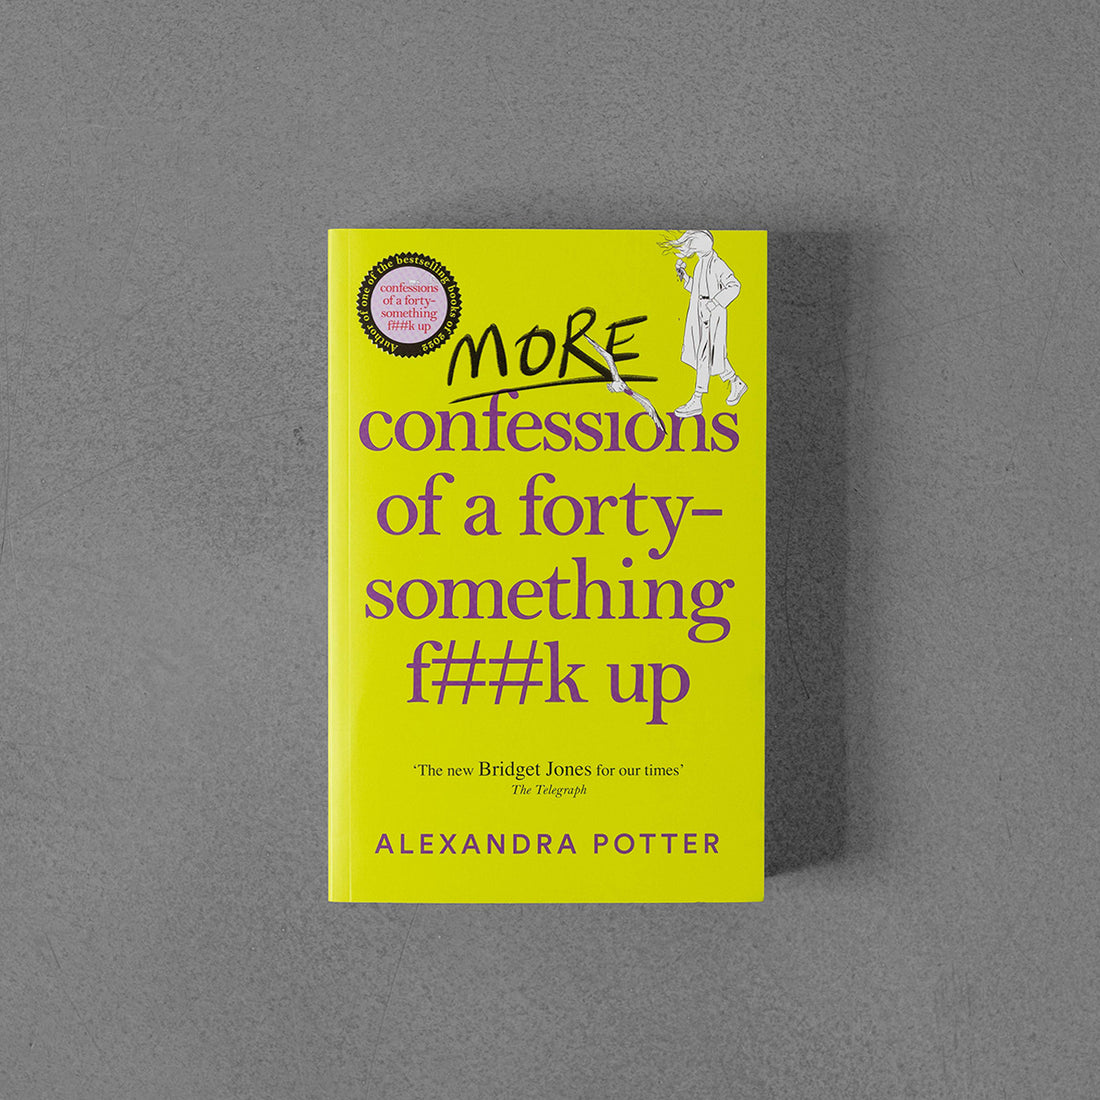 More Confessions of a Forty-Something F**k Up - Alexandra Potter